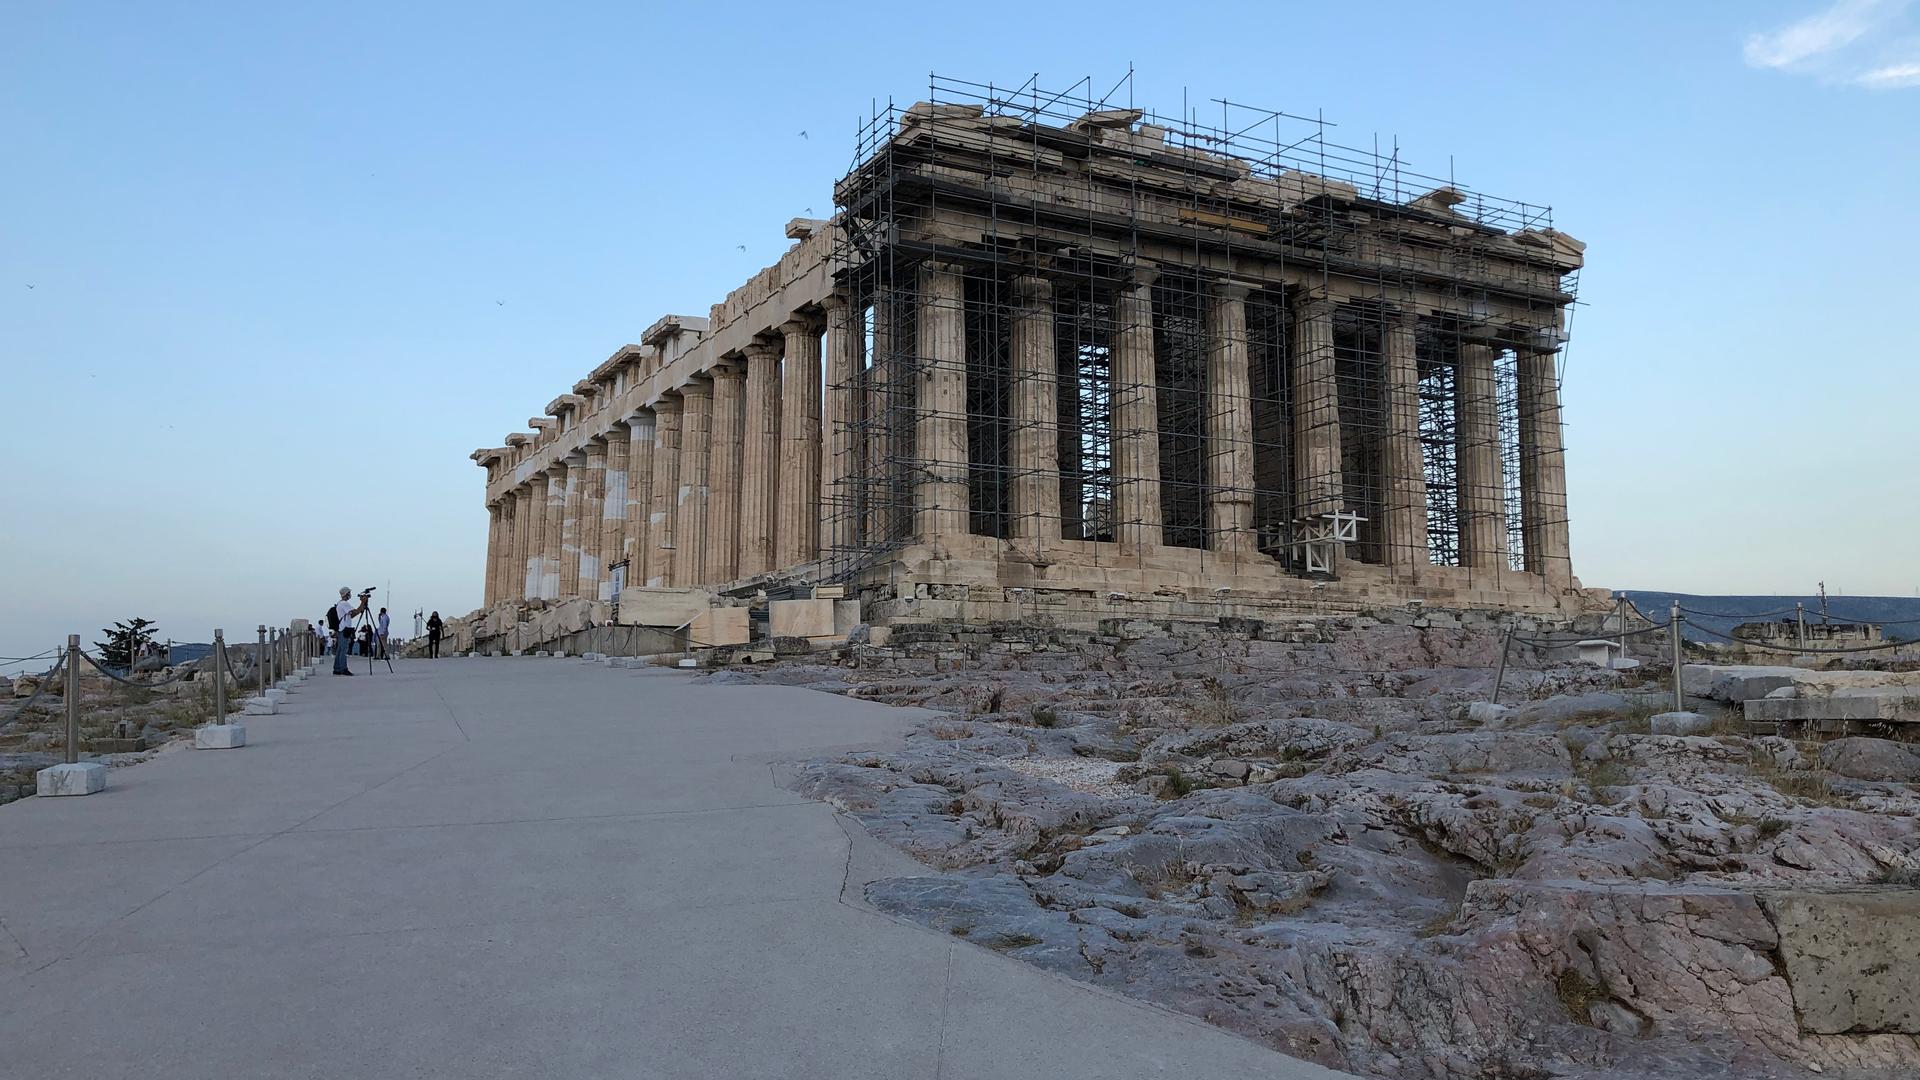 A concrete walkway has been paved on the Acropolis plateau in an effort to make the site more accessible. But critics say materials used would make it impossible to remove the pathway without damaging the ancient bedrock underneath.